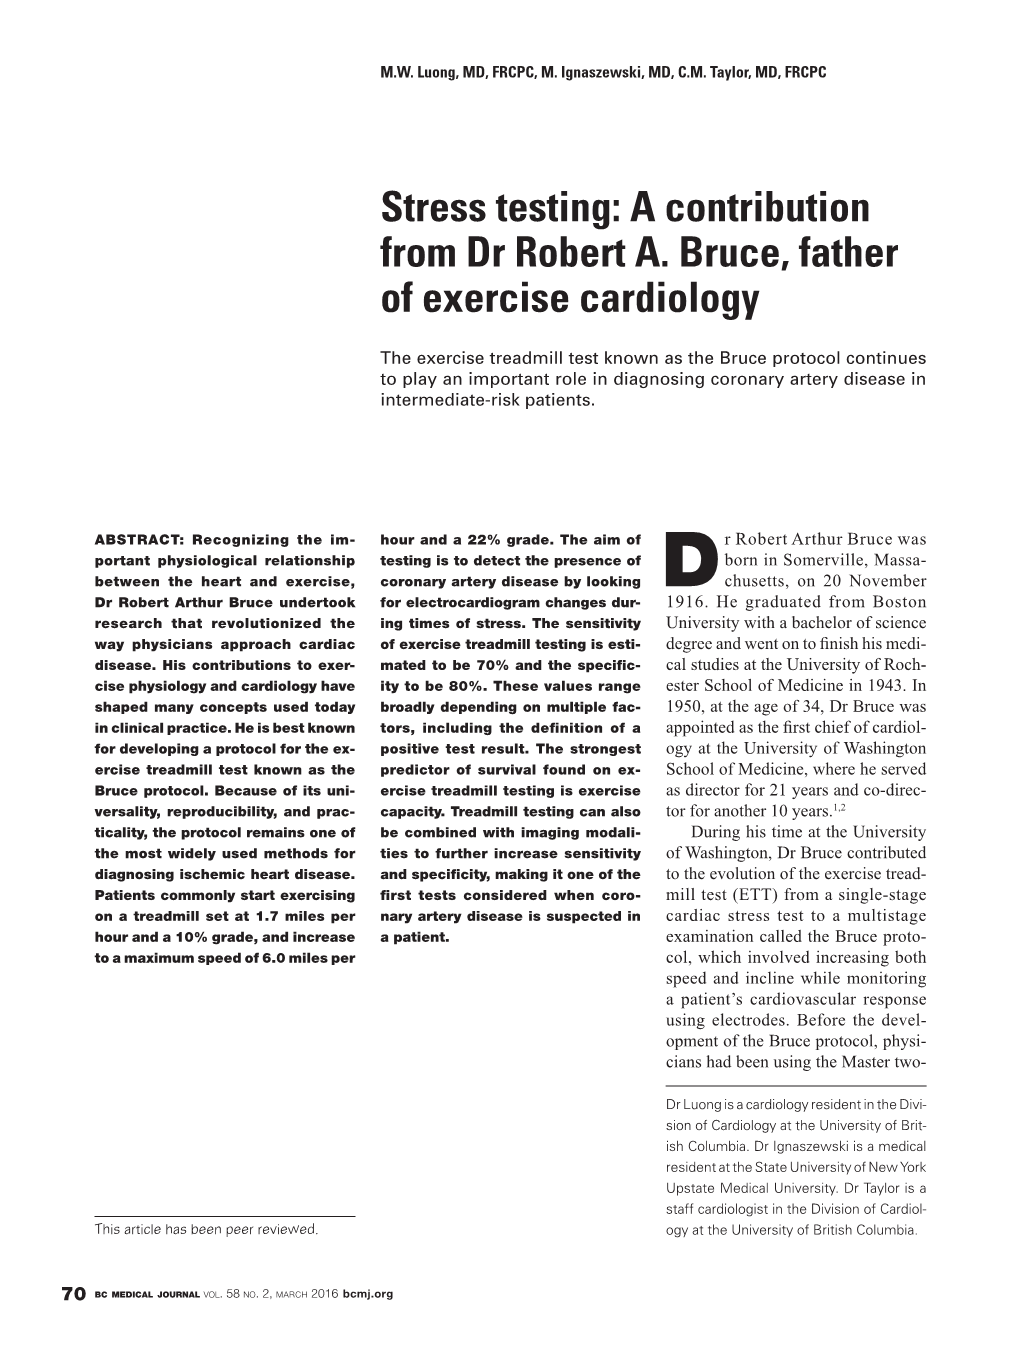 Stress Testing: a Contribution from Dr Robert A